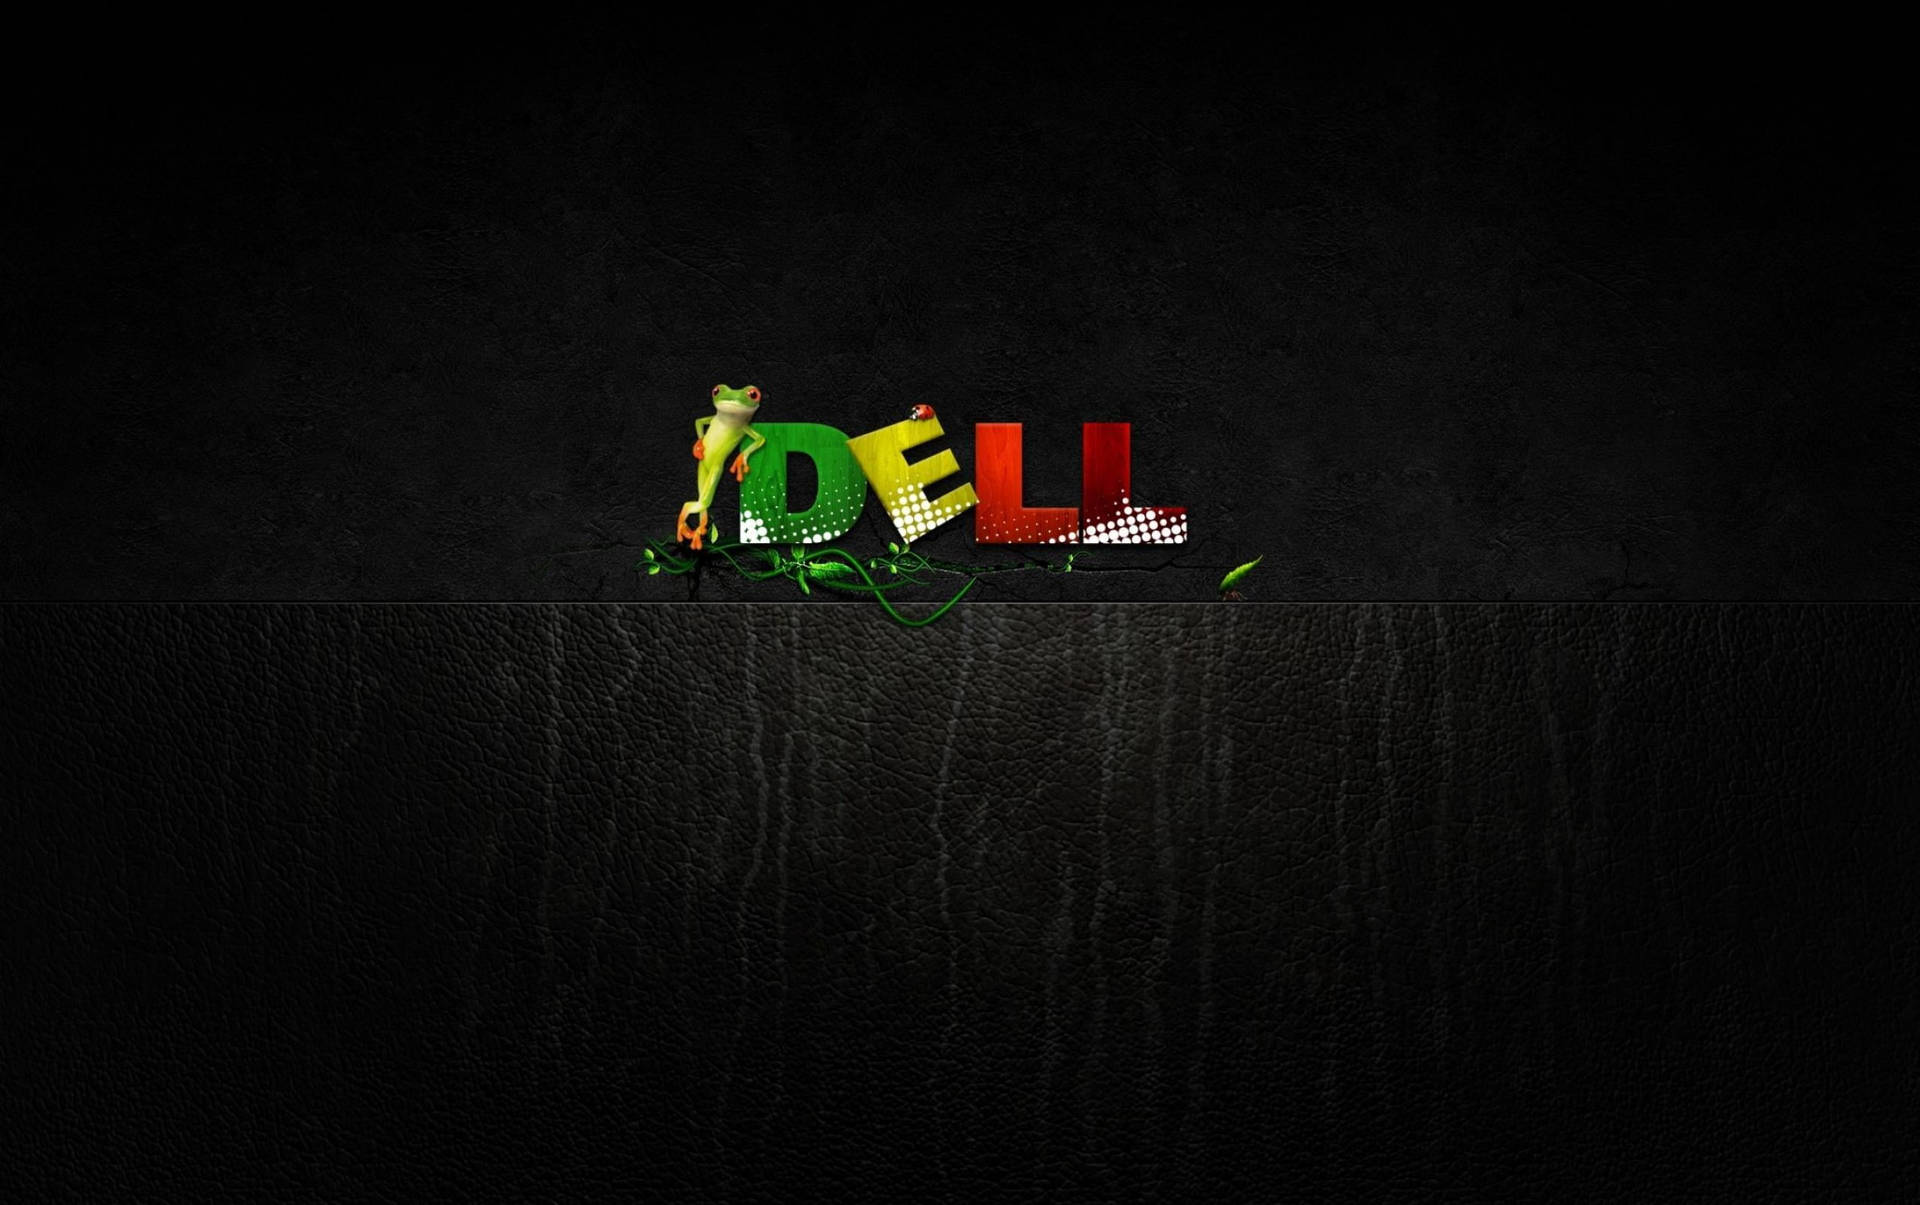 Dell Laptop With Frog Background